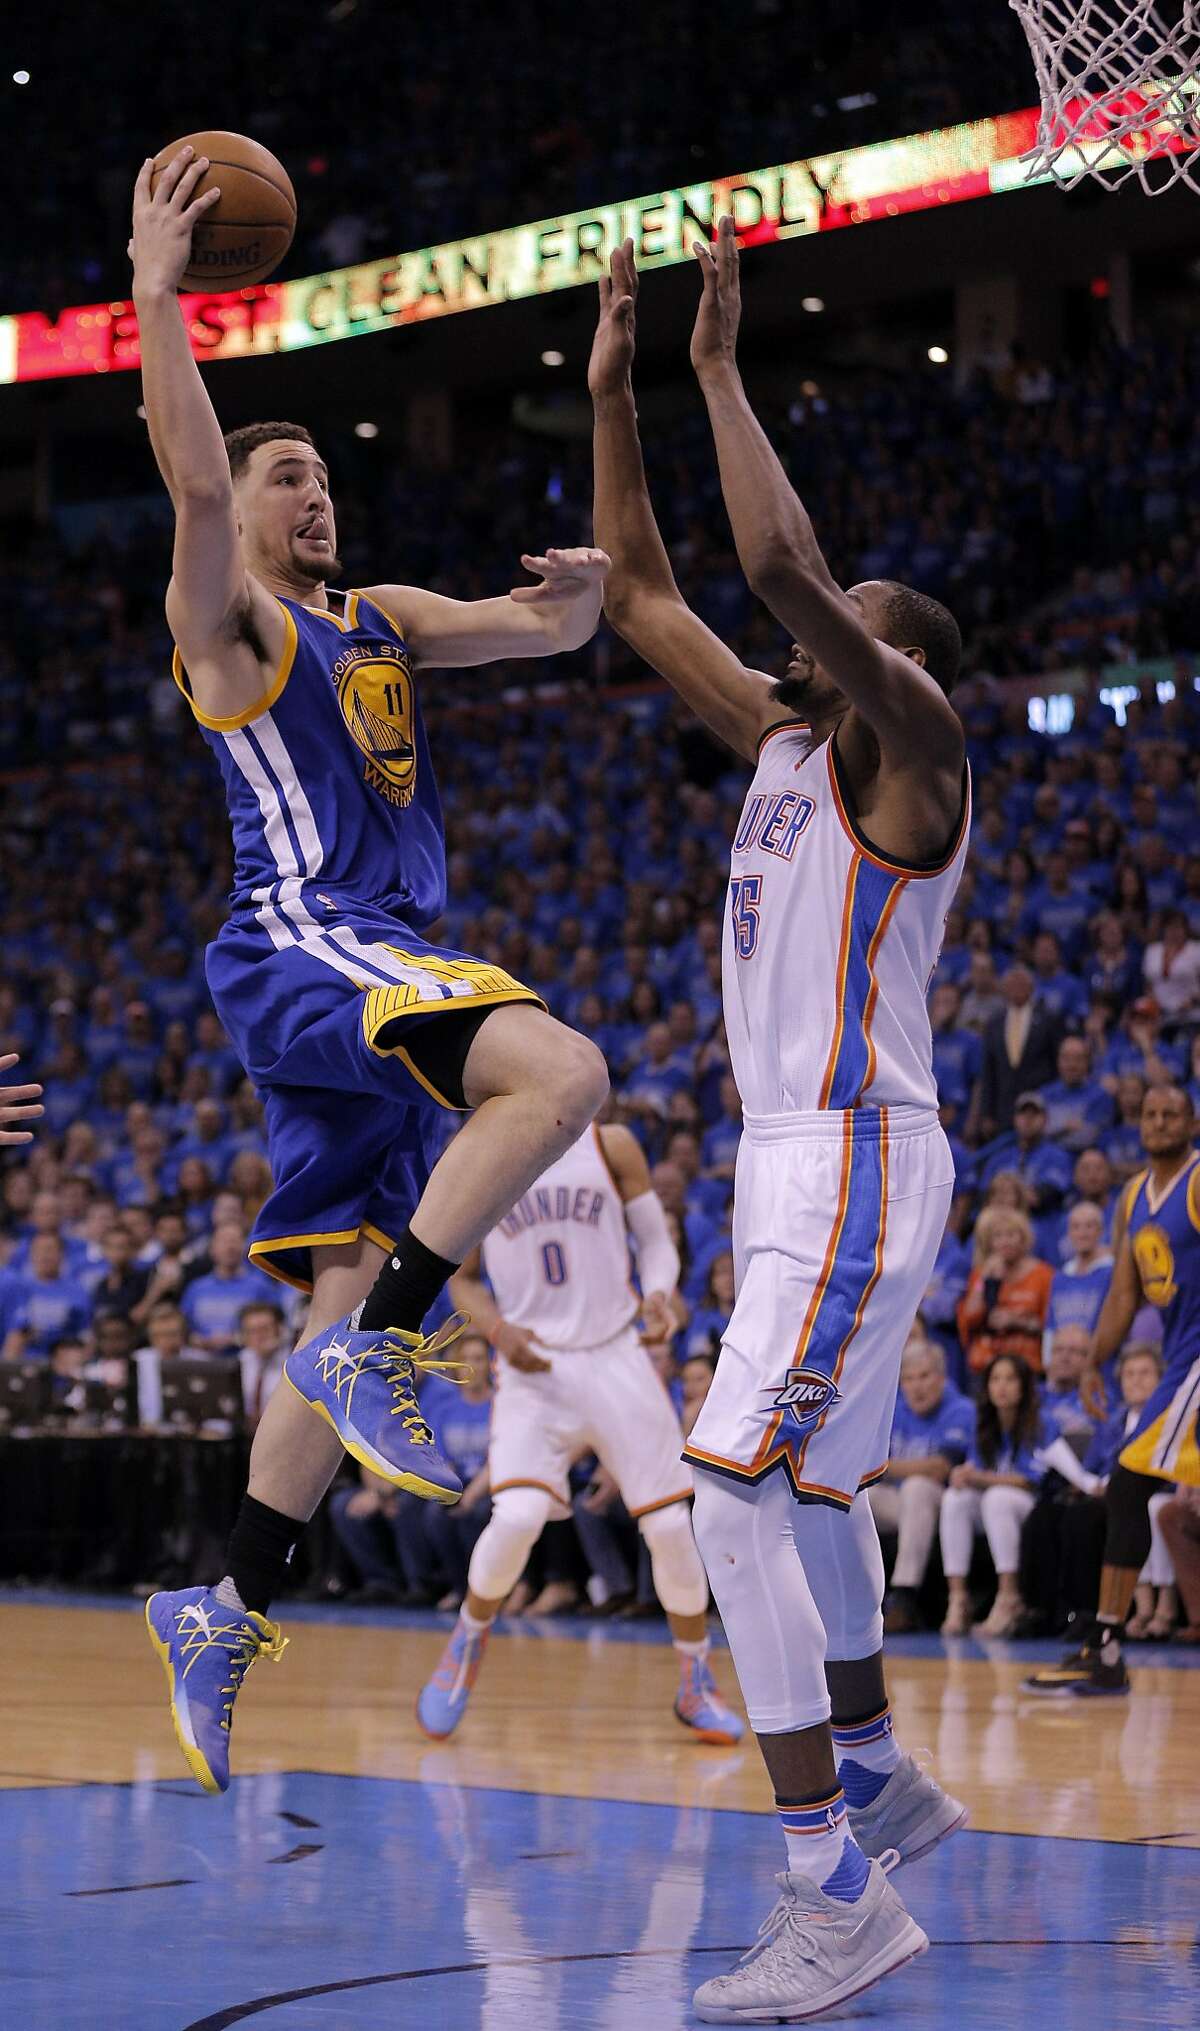 Klay Thompson (11) shoots over Kevin Durant (35) in the second half as the Golden State Warriors played the Oklahoma City Thunder in Game 6 of the Western Conference Finals at Chesapeake Energy Arena in Oklahoma City, Okla., on Saturday, May 28, 2016.